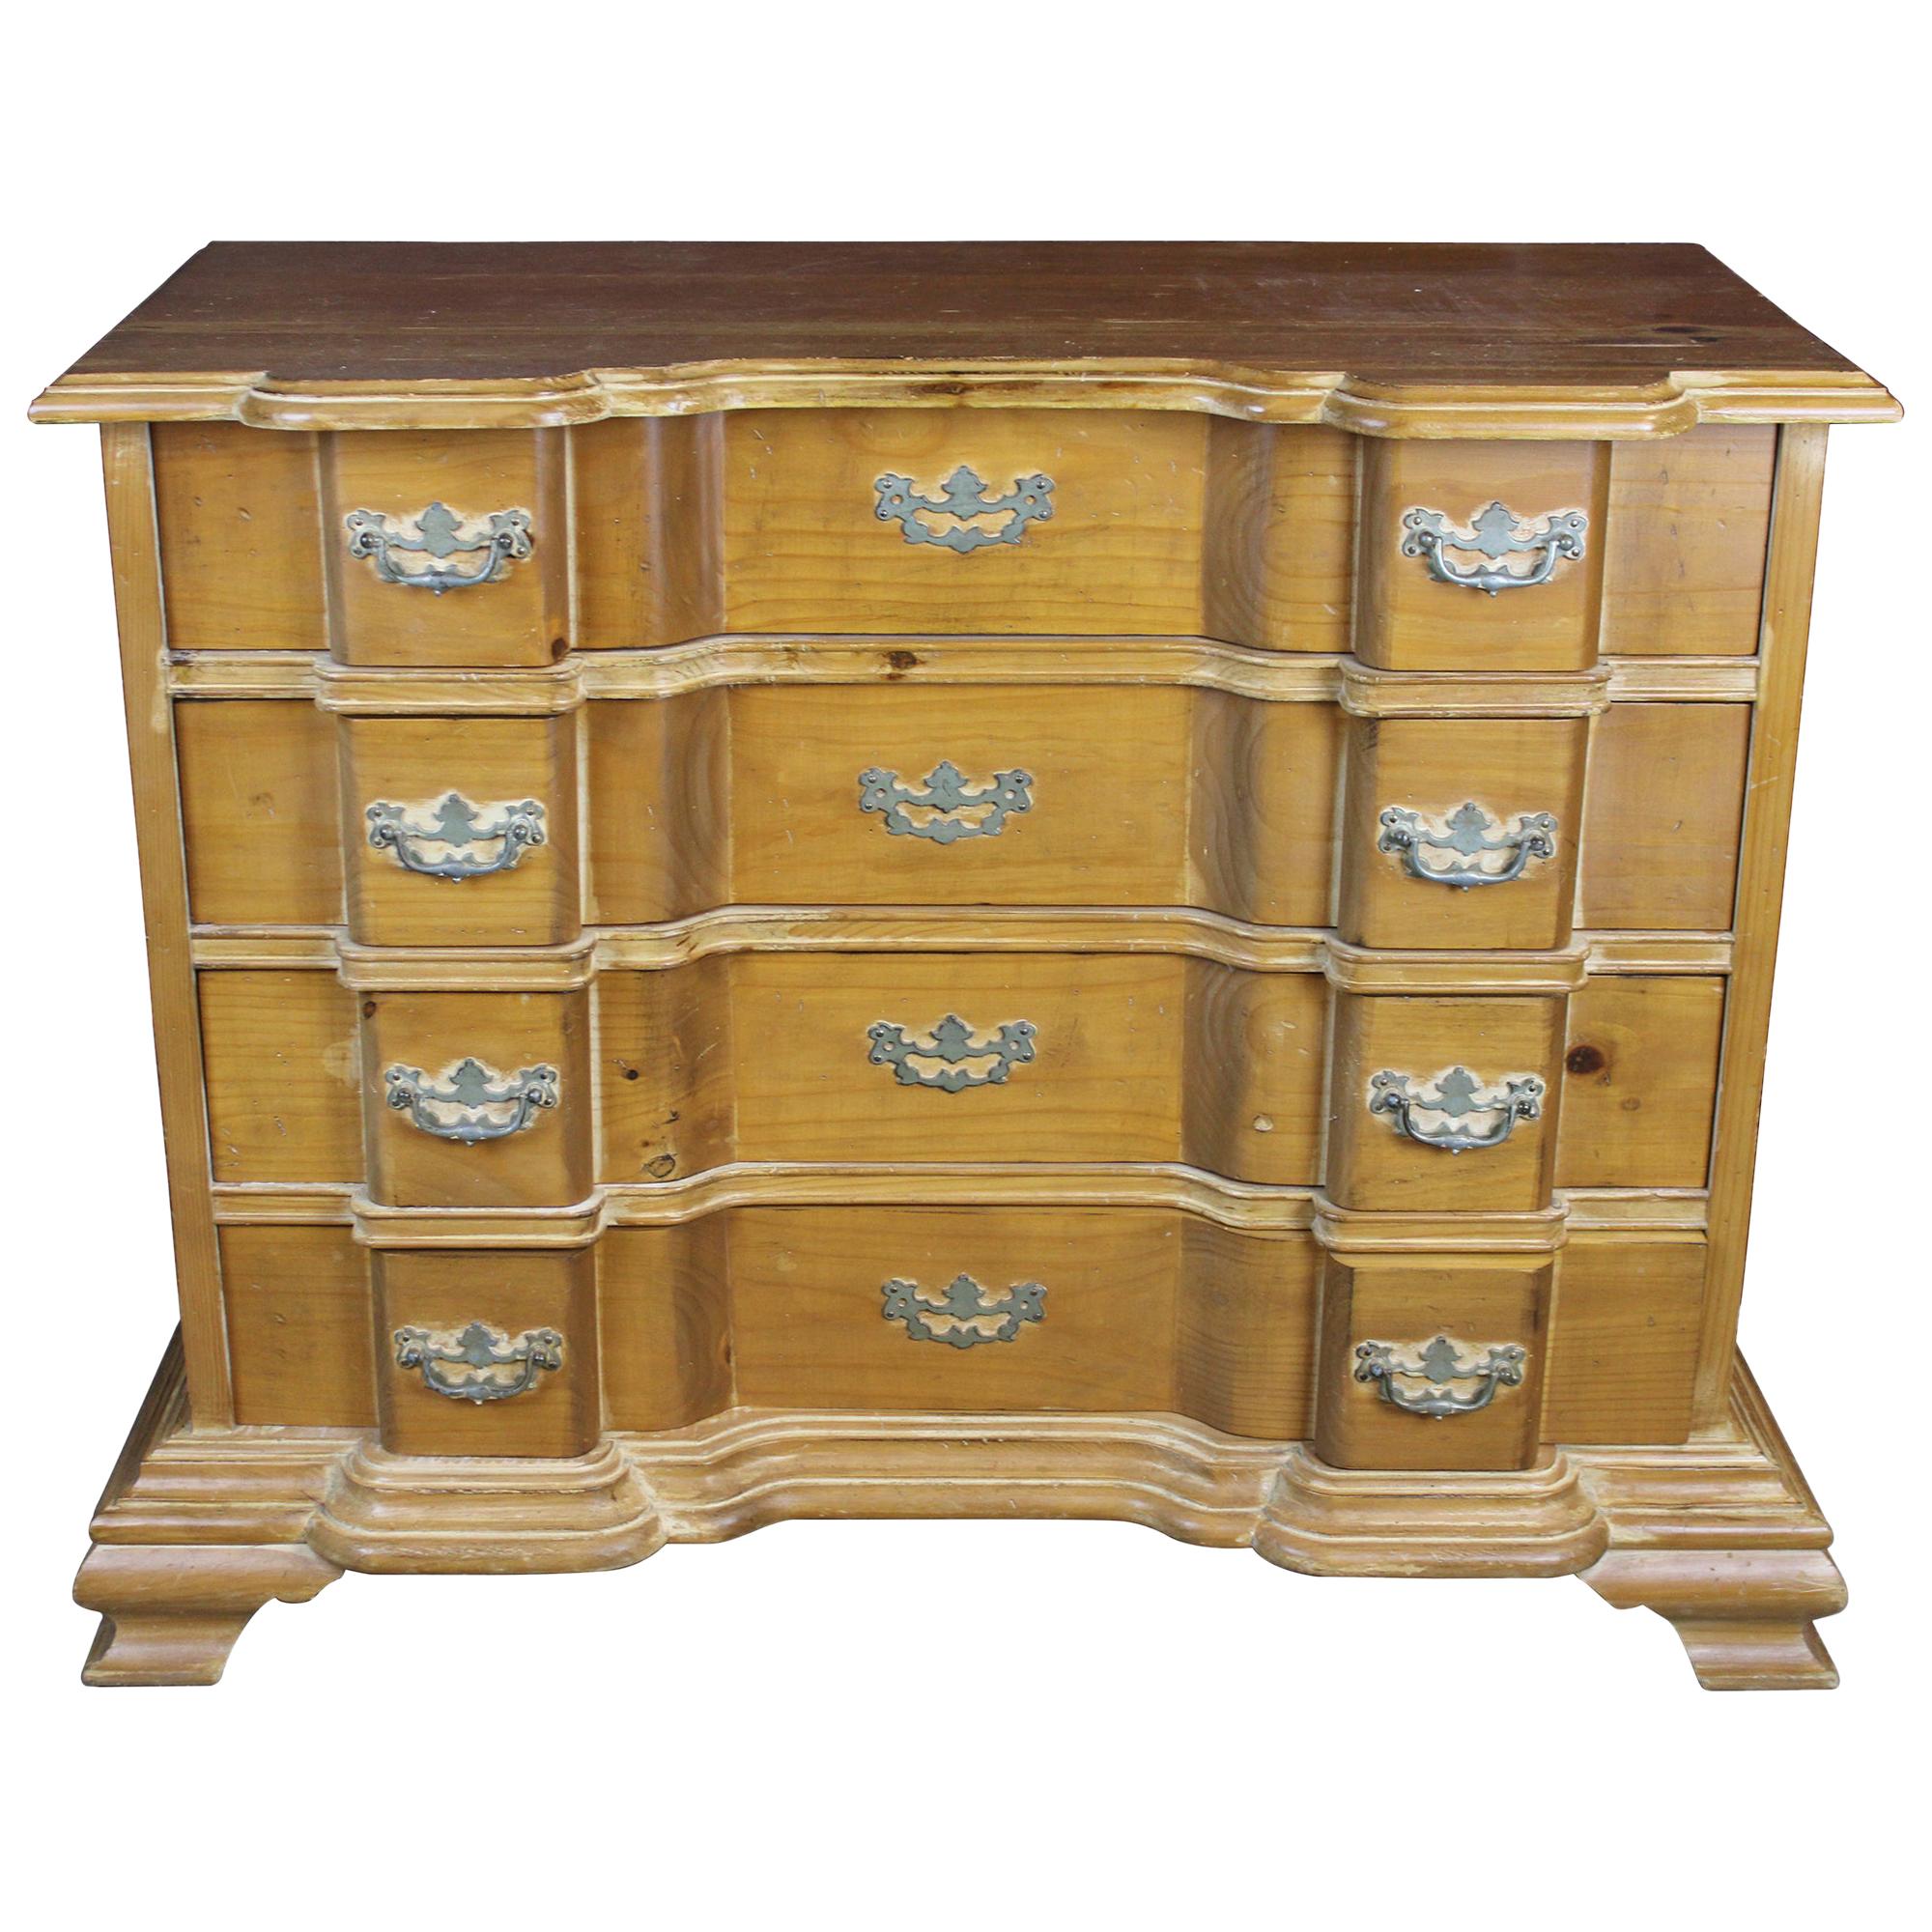 stanley by Goddard Chest craftsman american For | Sale Blockfront collection at craftsman chest Cherry Craftsman 1stDibs stanley stanley, bachelor Stanley the american furniture, Bachelors by Dresser collection furniture American